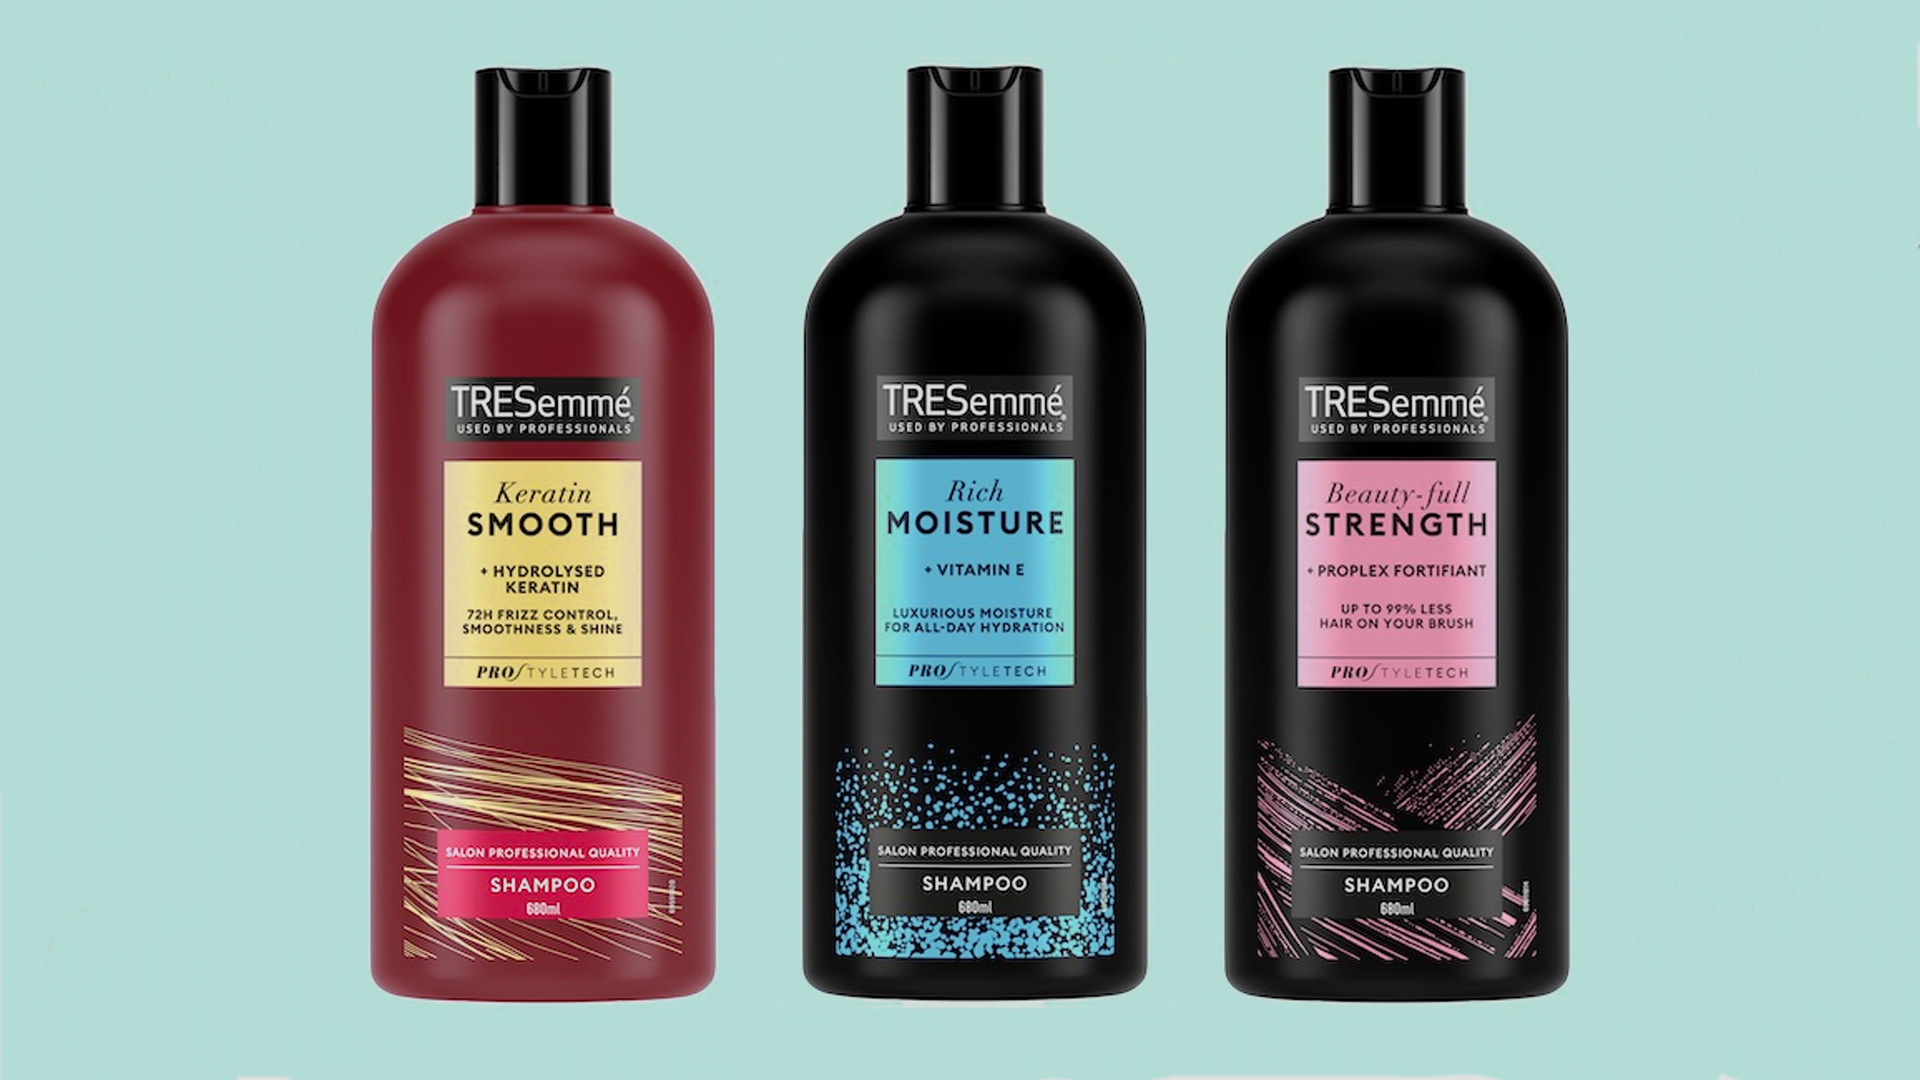 TRESemmé new packaging and formulation